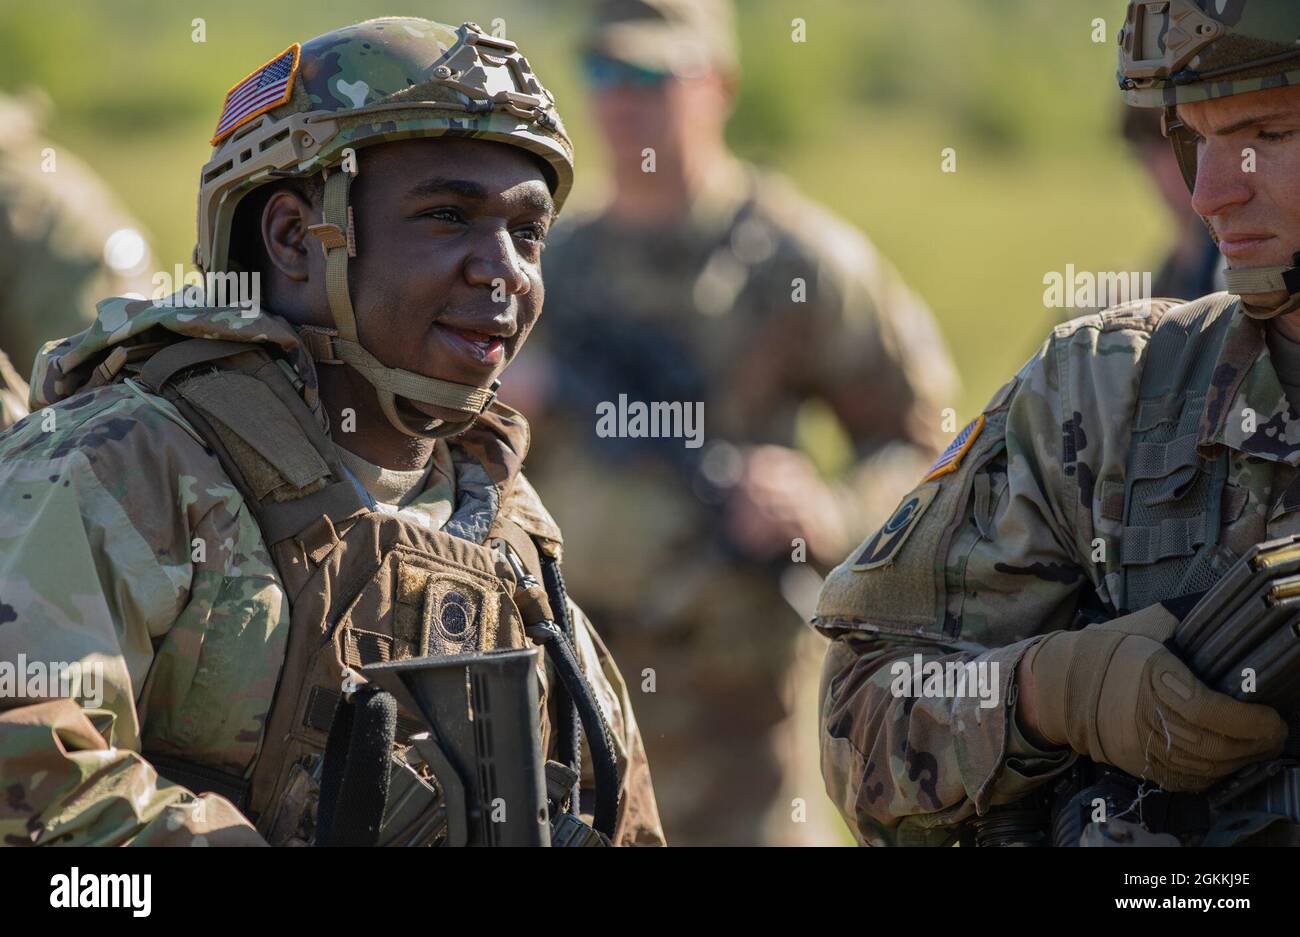 Spc. Odell August, an indirect fire infantryman assigned to 2nd Battalion, 124th Infantry Regiment, 53rd Infantry Brigade Combat Team, shares a laugh with his battle buddies before stepping onto a shooting range at Manjača Training Area, Bosnia and Herzegovina (BiH), May 18, 2021. The 2-124th Soldiers are participating in Immediate Response 21, a joint training exercise, alongside the Armed Forces of Bosnia and Herzegovina (AFBiH). Immediate Response is an exercise in support of DEFENDER-Europe 21. DEFENDER-Europe 21 is a prime example of U.S. forces working together closely with NATO allies a Stock Photo